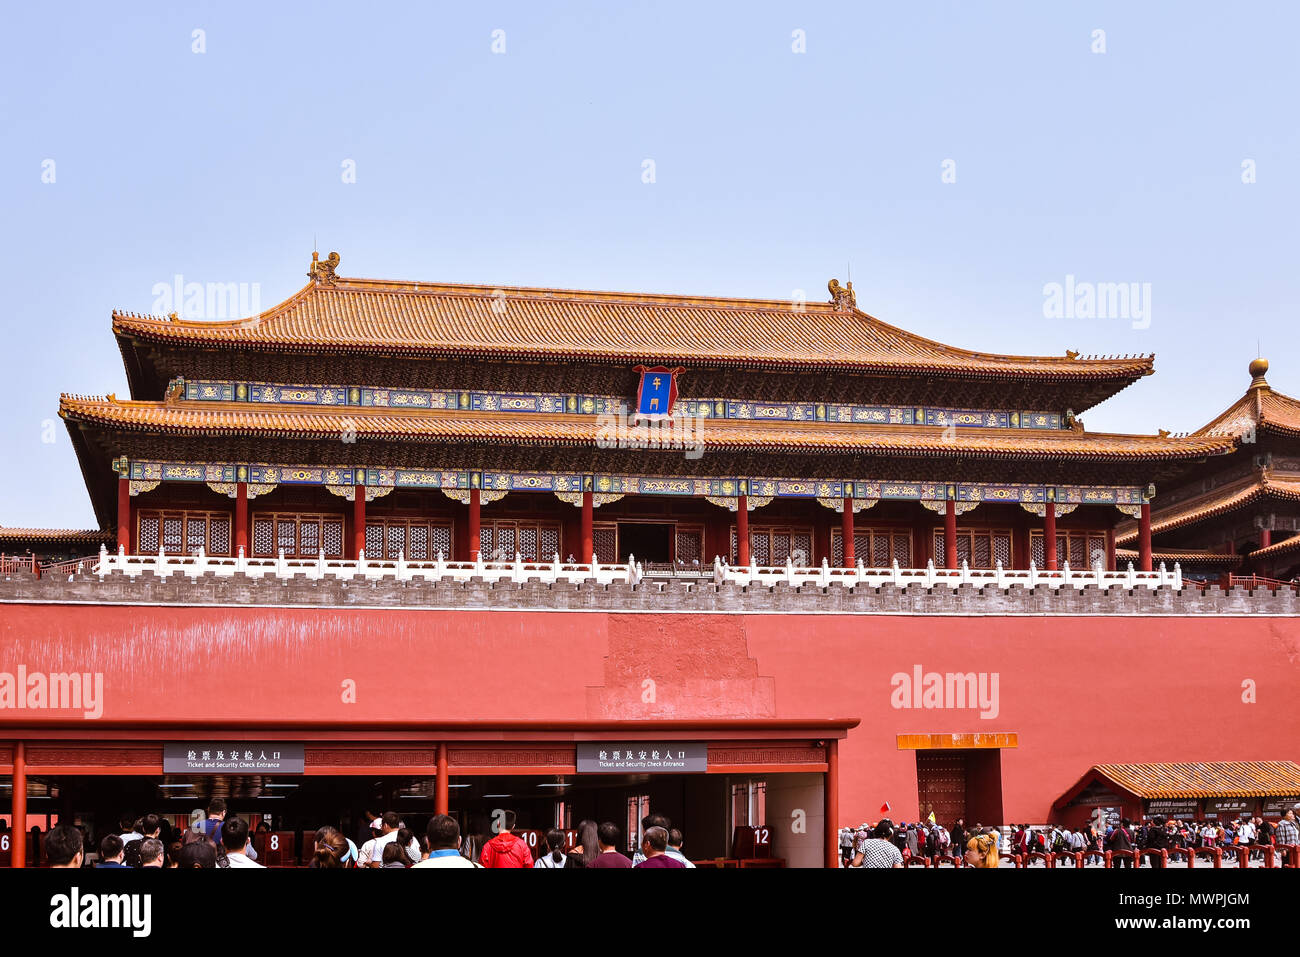 Beijing, China - Apr. 18, 2018: Meridian gate, entrance to the Forbidden City, Beijing, China. Stock Photo